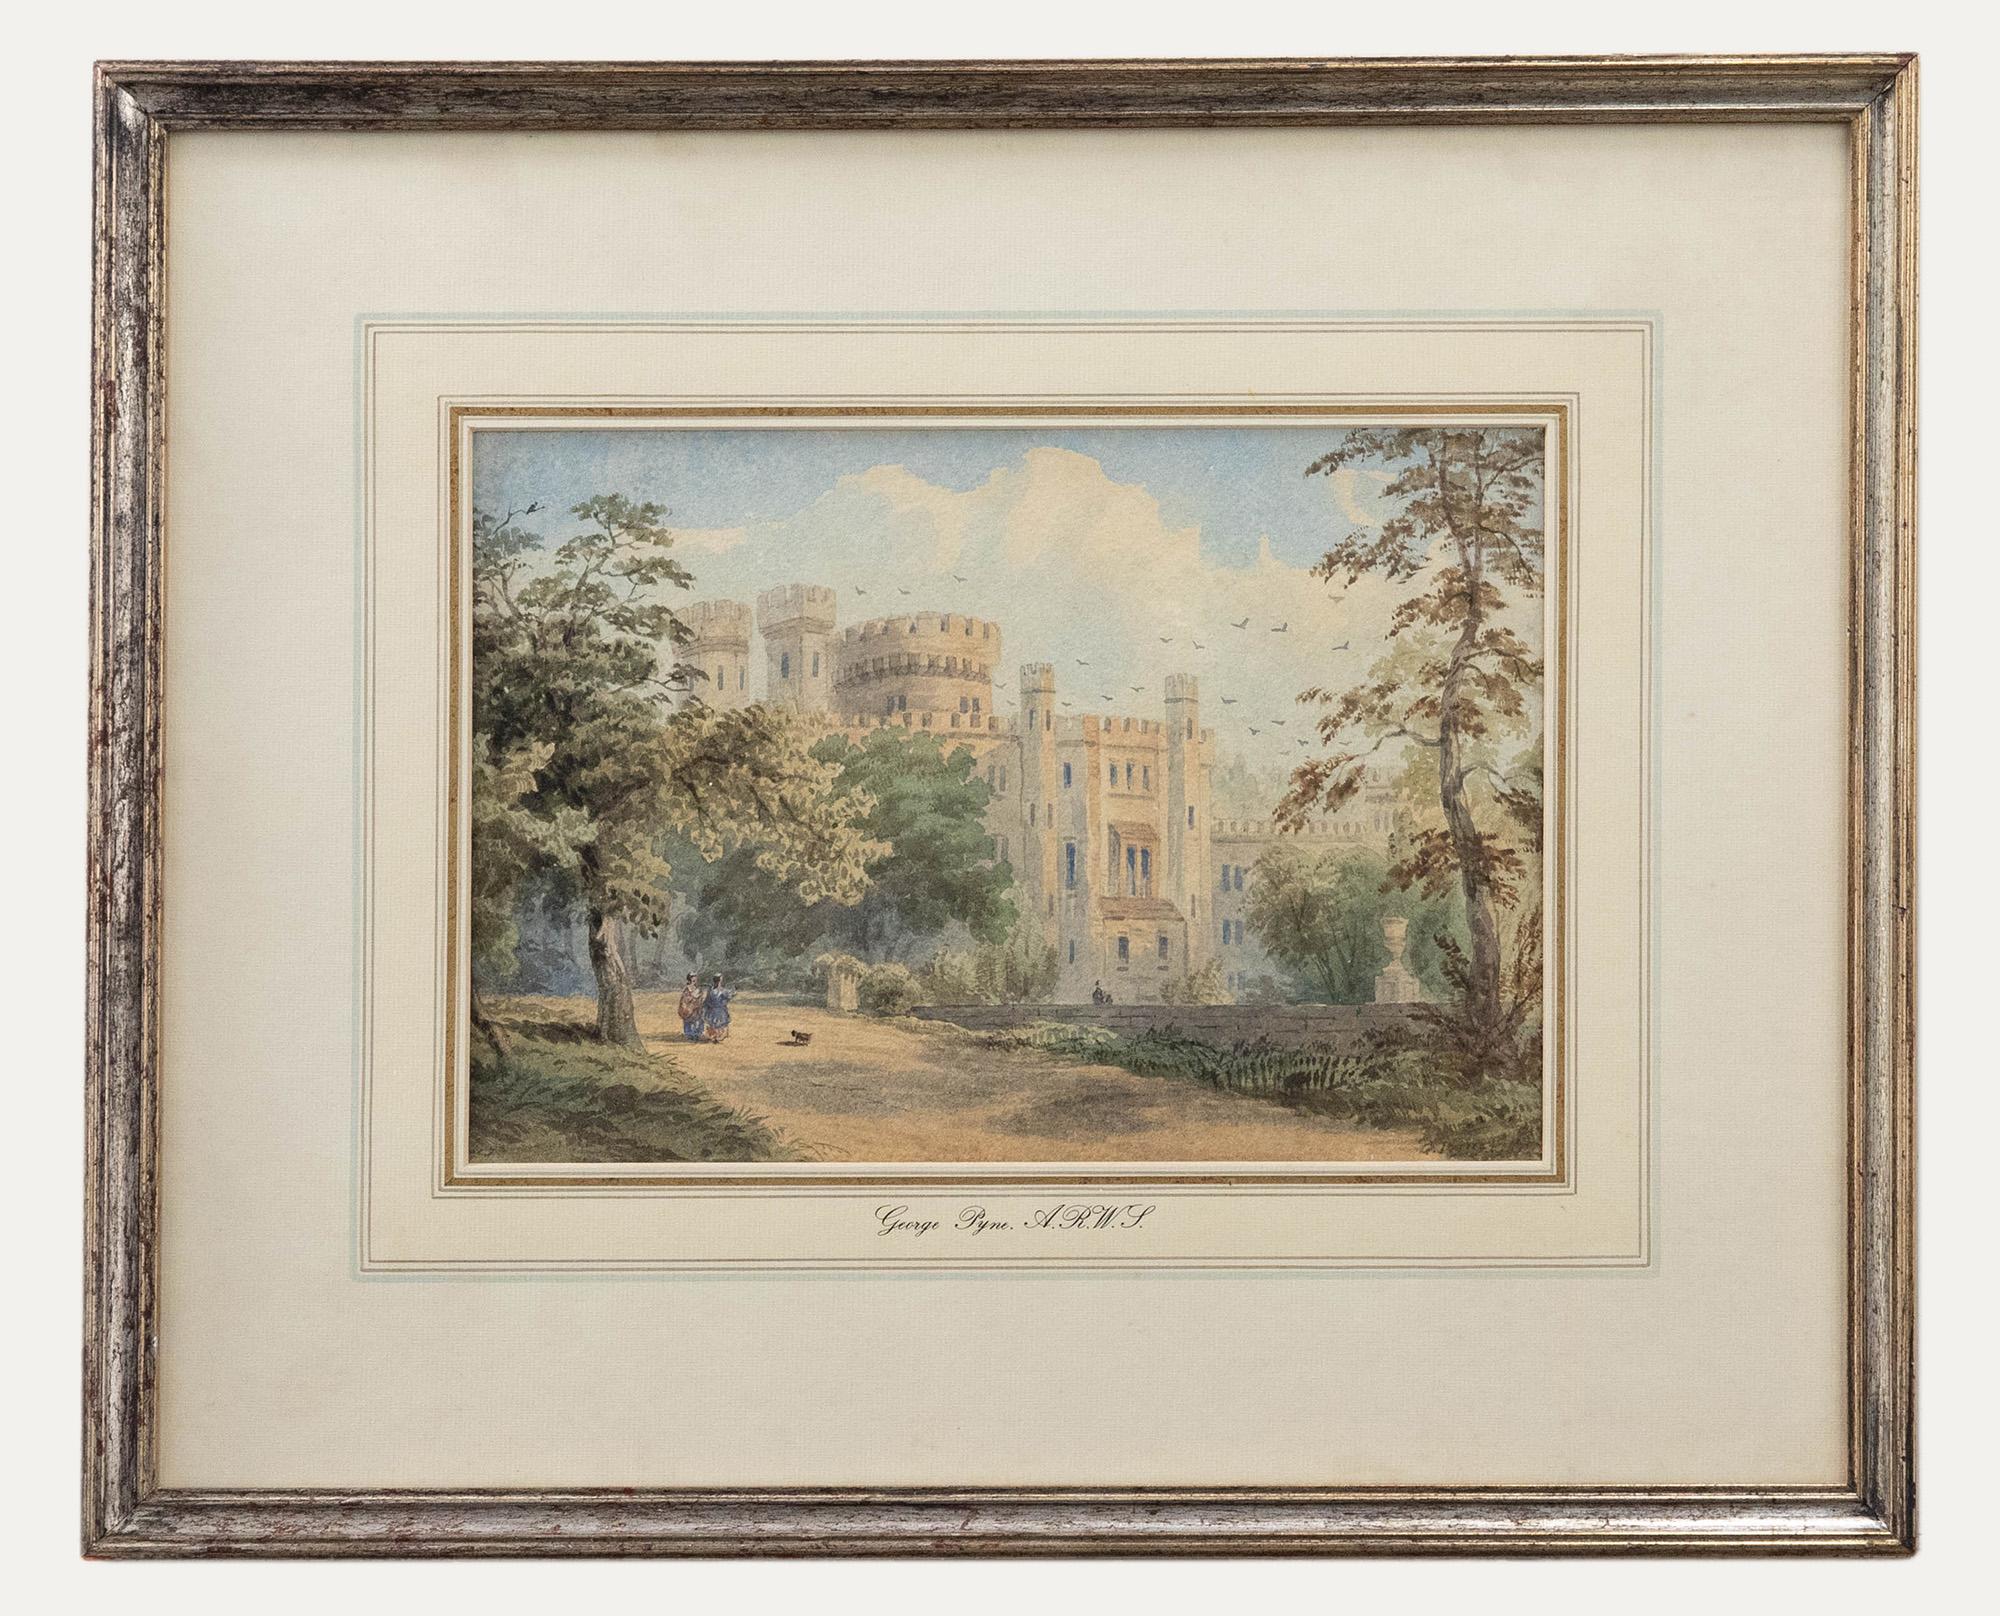 Signed faintly to the lower right. Artist Name inscribed to the mount. Presented in a gilt frame and washline mount. On paper.